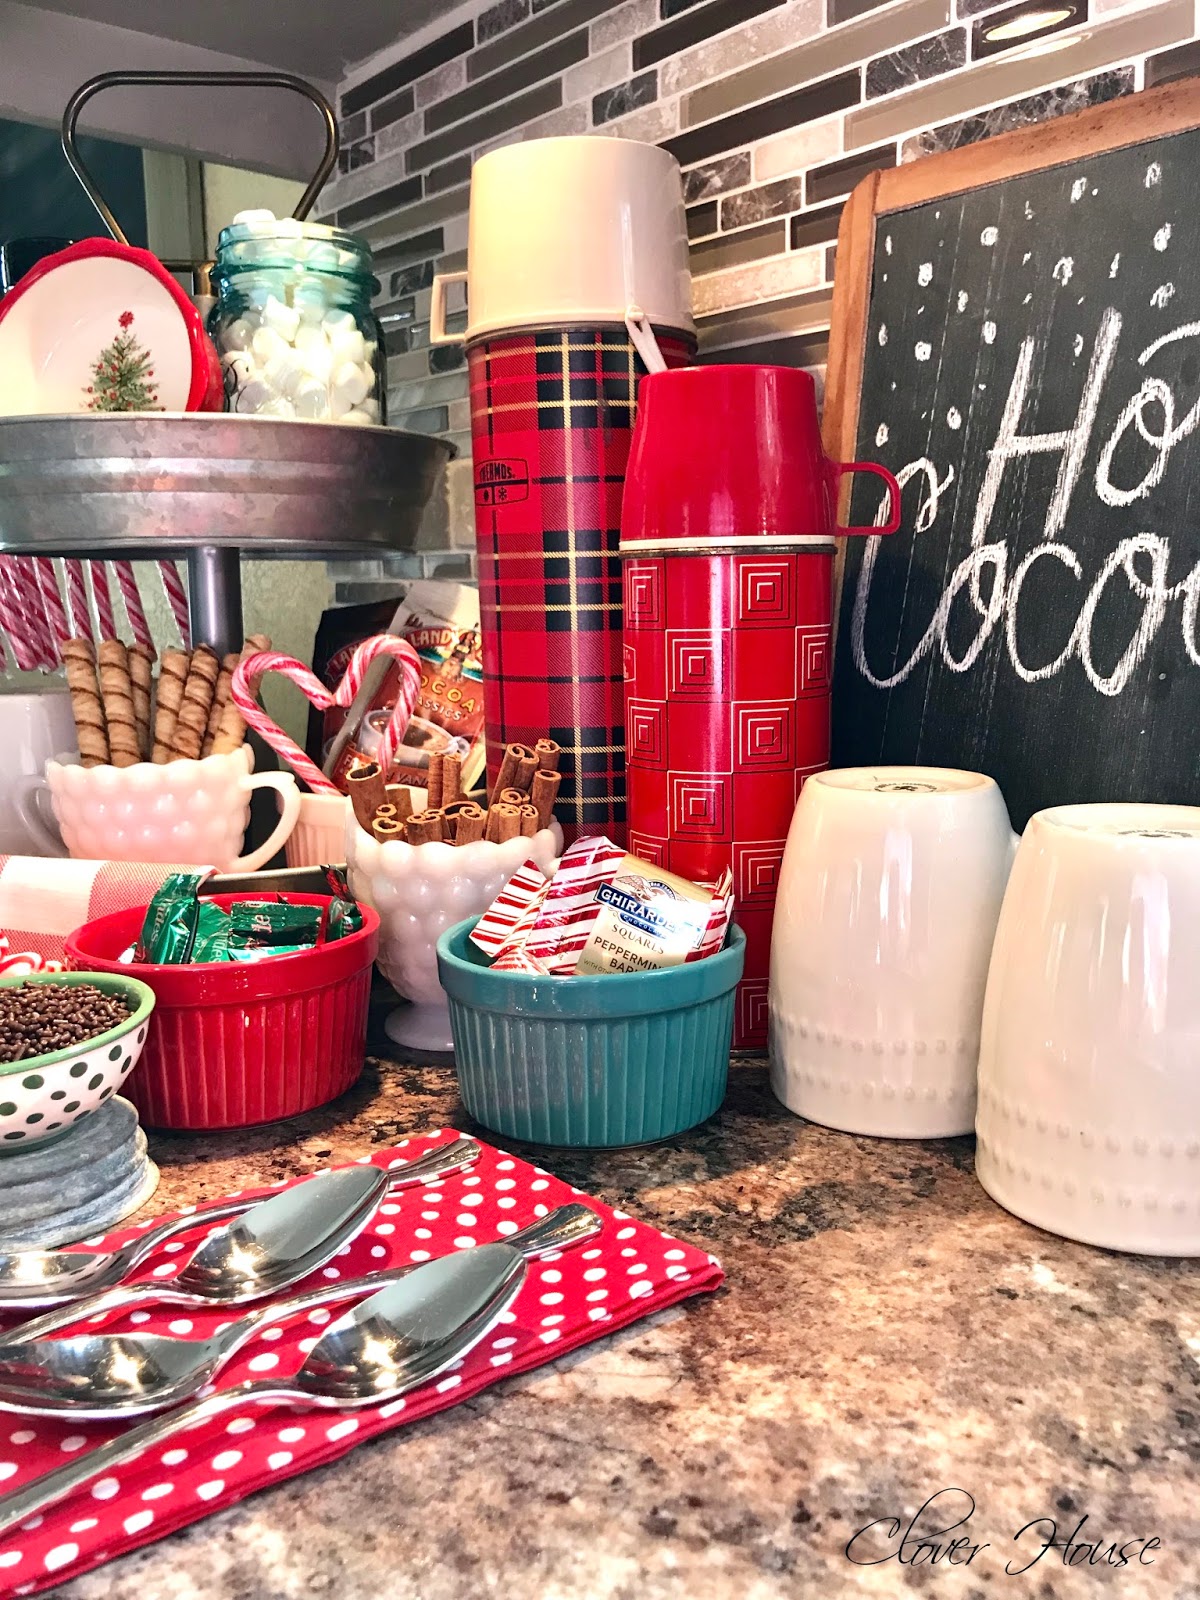 A hot cocoa bar for small spaces - Chalking Up Success!